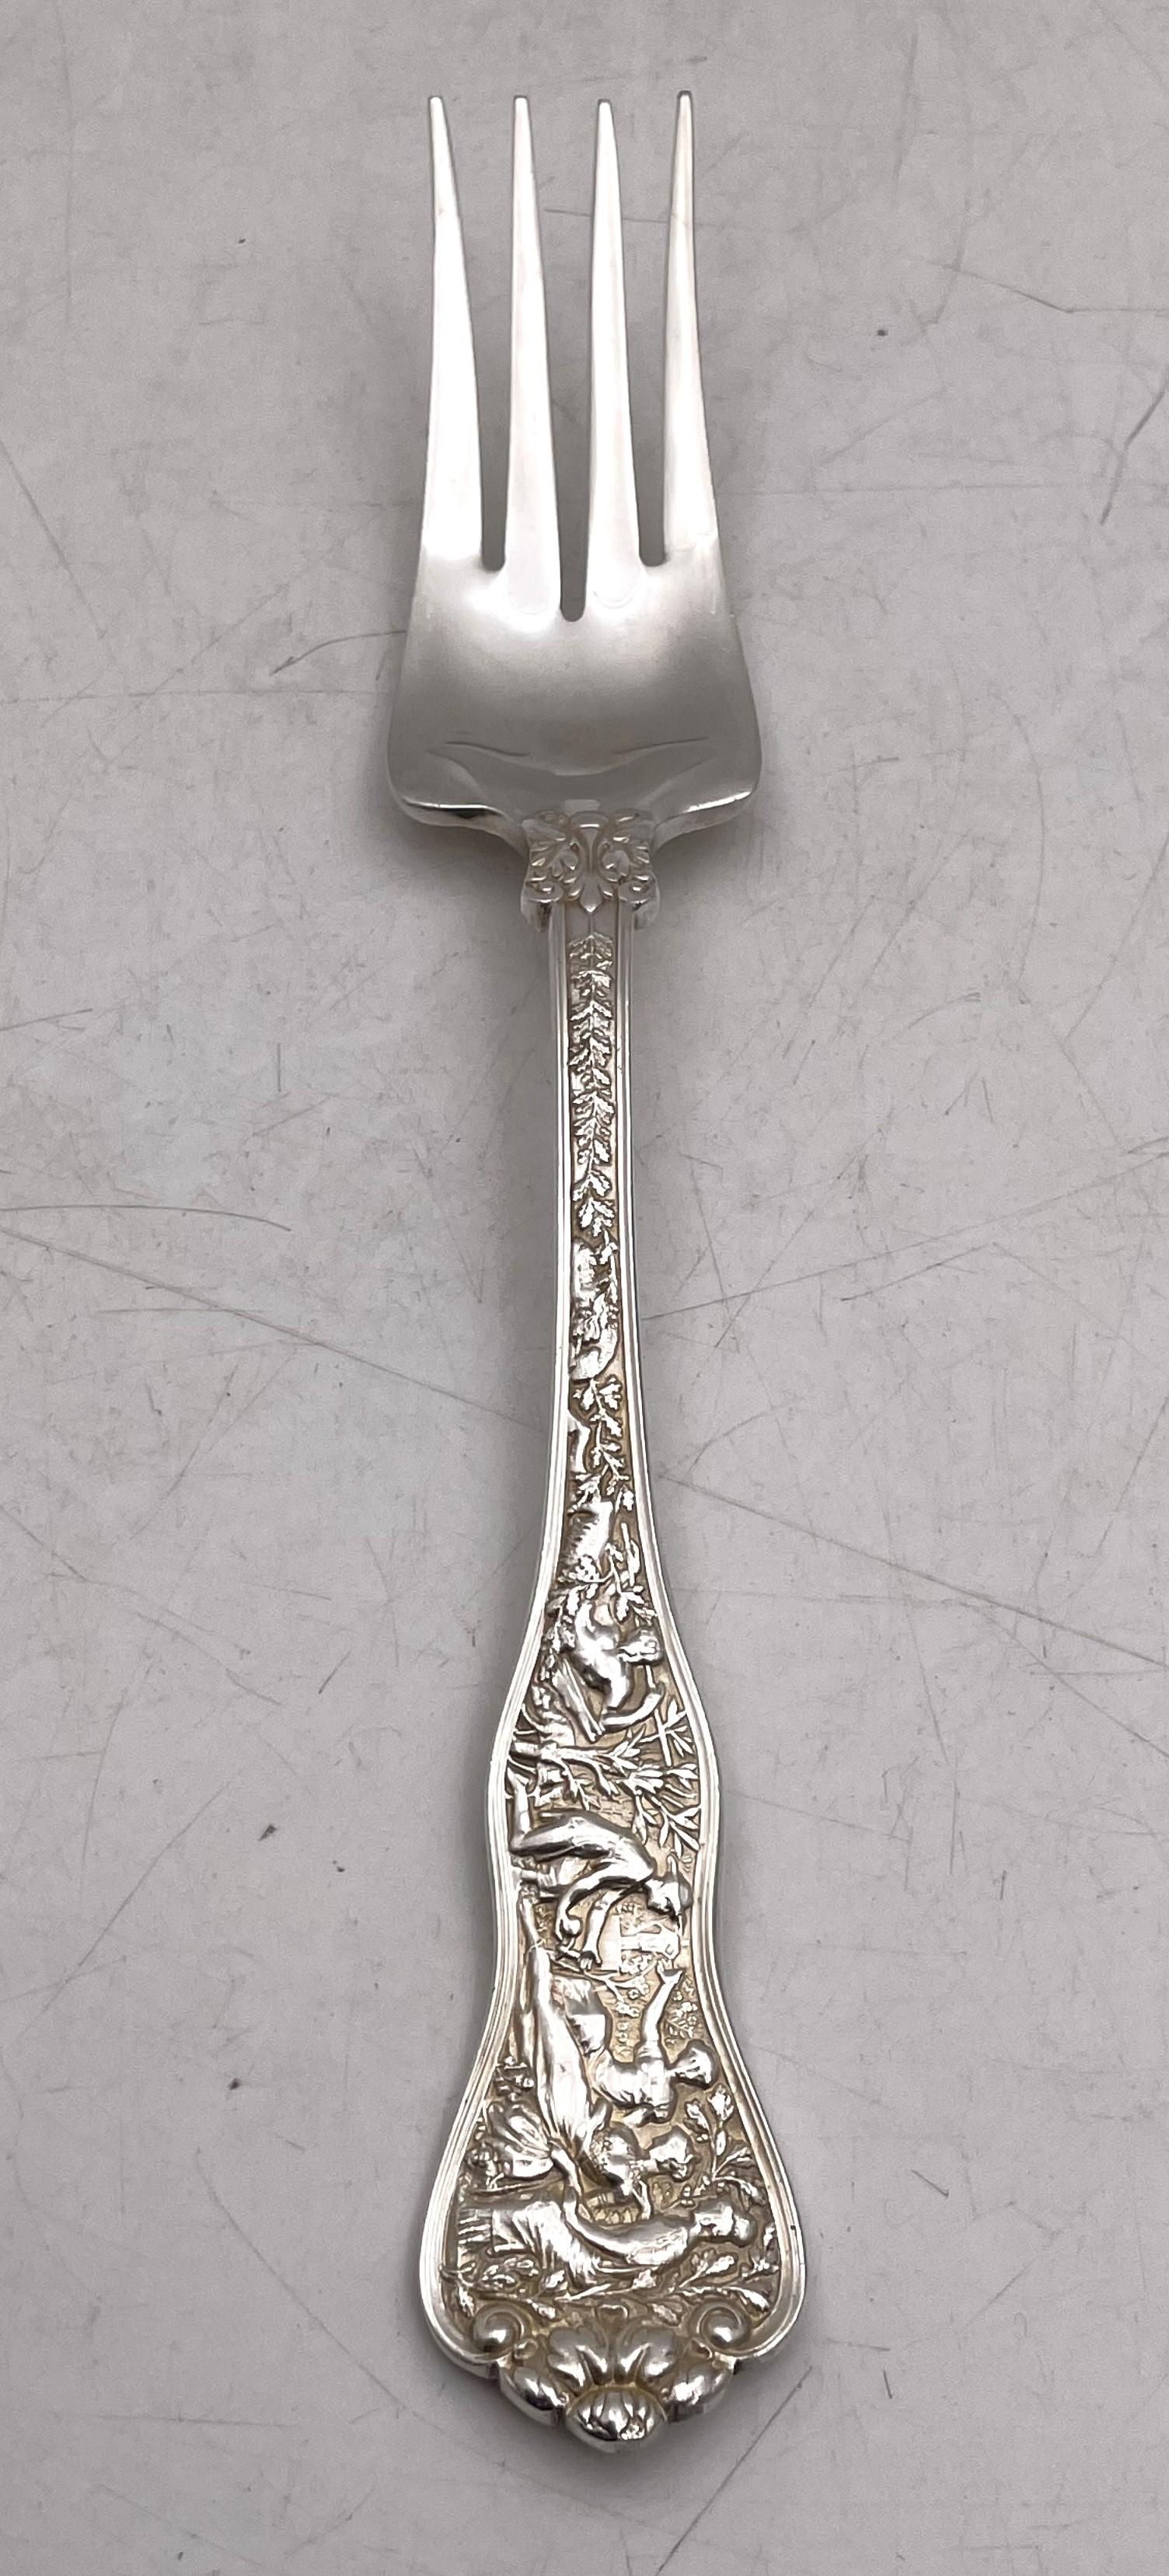 Tiffany & Co. pair of sterling silver cold meat forks in the celebrated Olympian pattern, beautifully adorned with human figures and natural motifs, measuring 8 3/4'' in length, and bearing hallmarks as shown.

The legendary Tiffany brand was